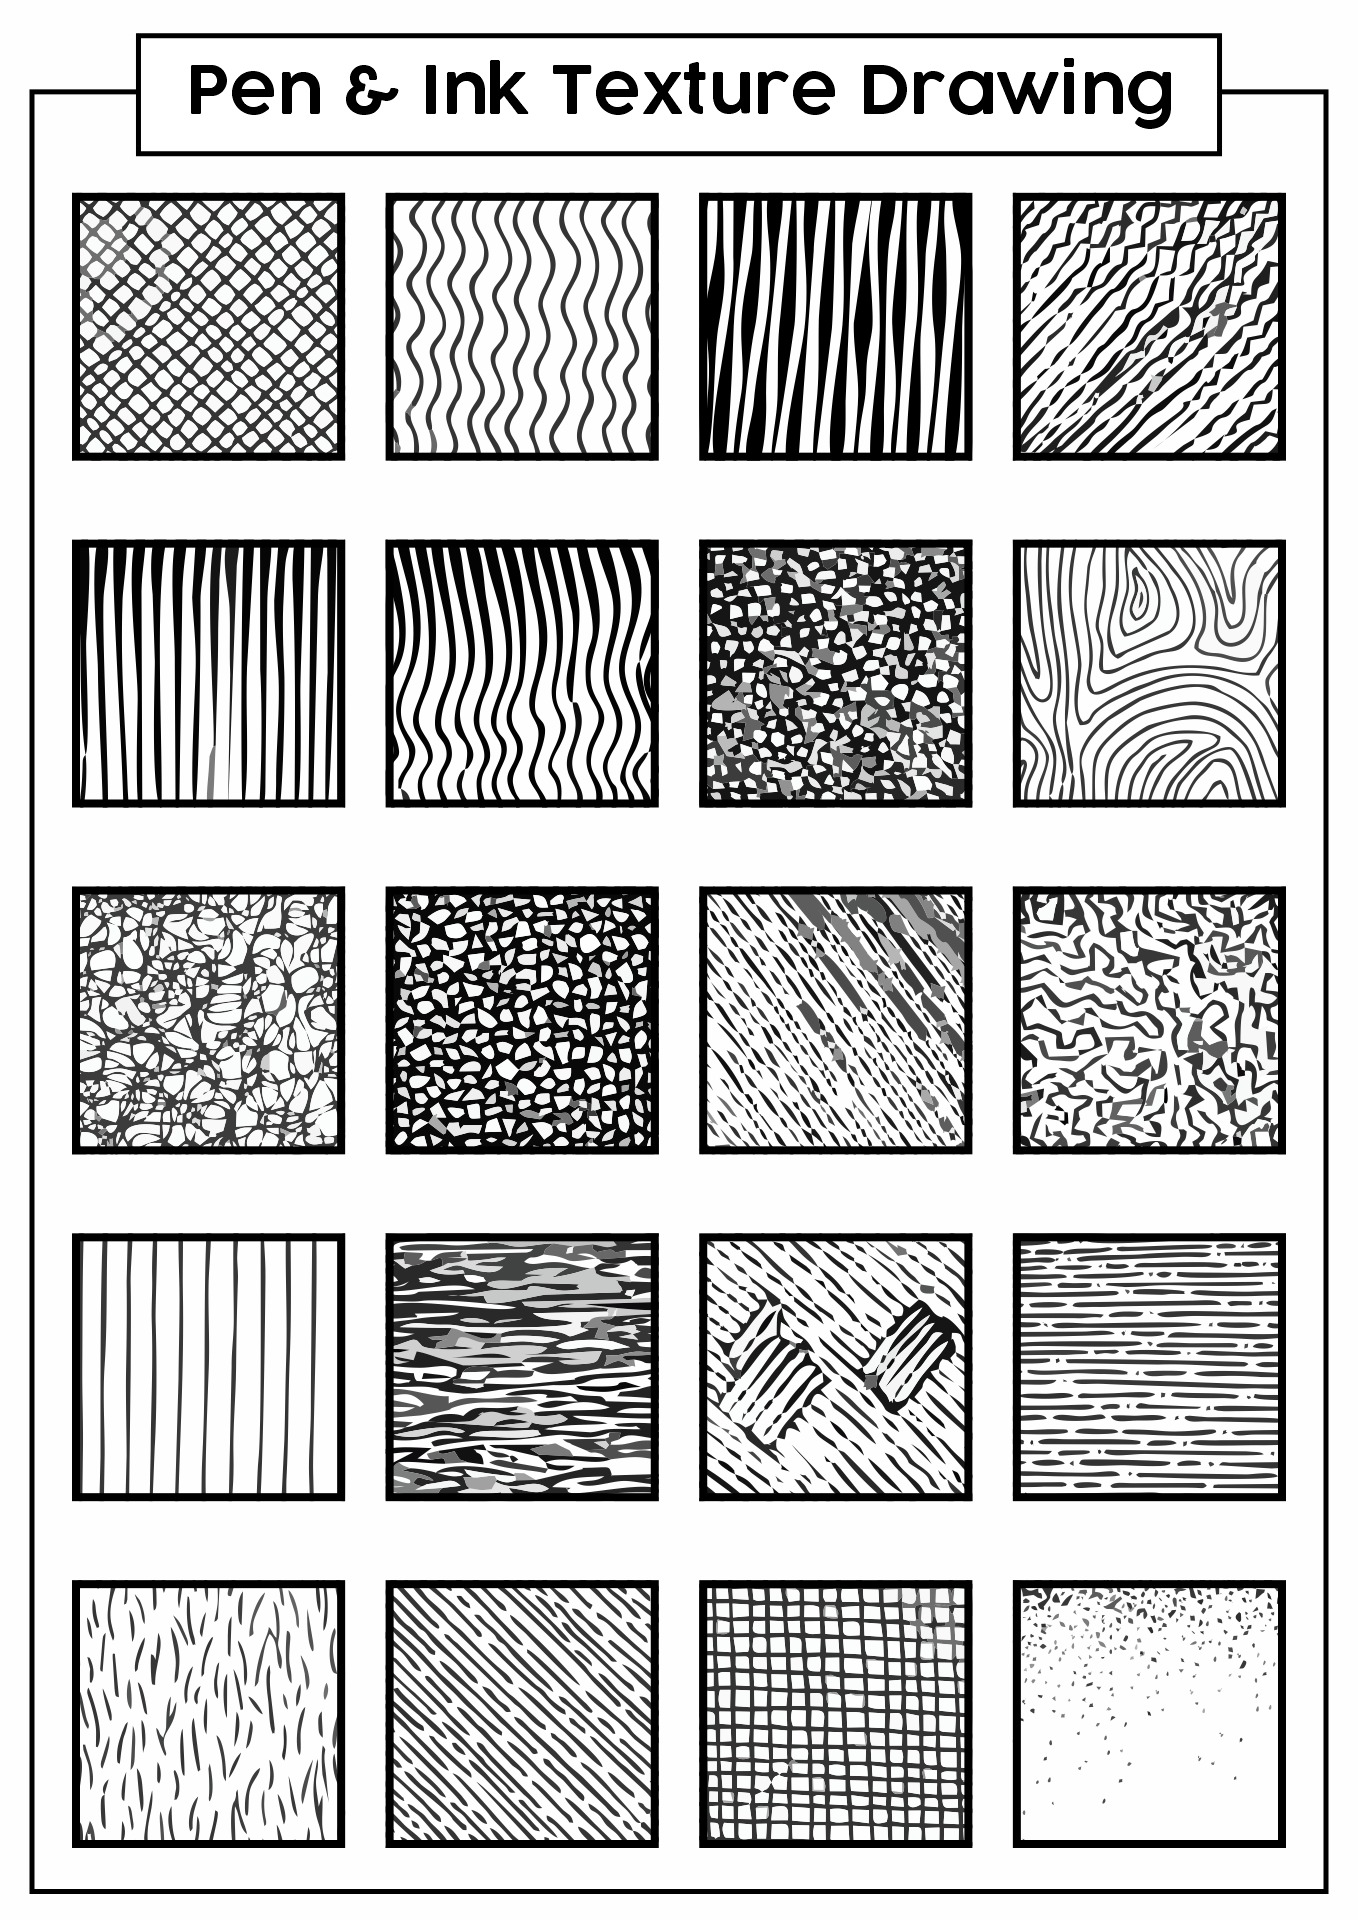 Pen and Ink Texture Worksheet